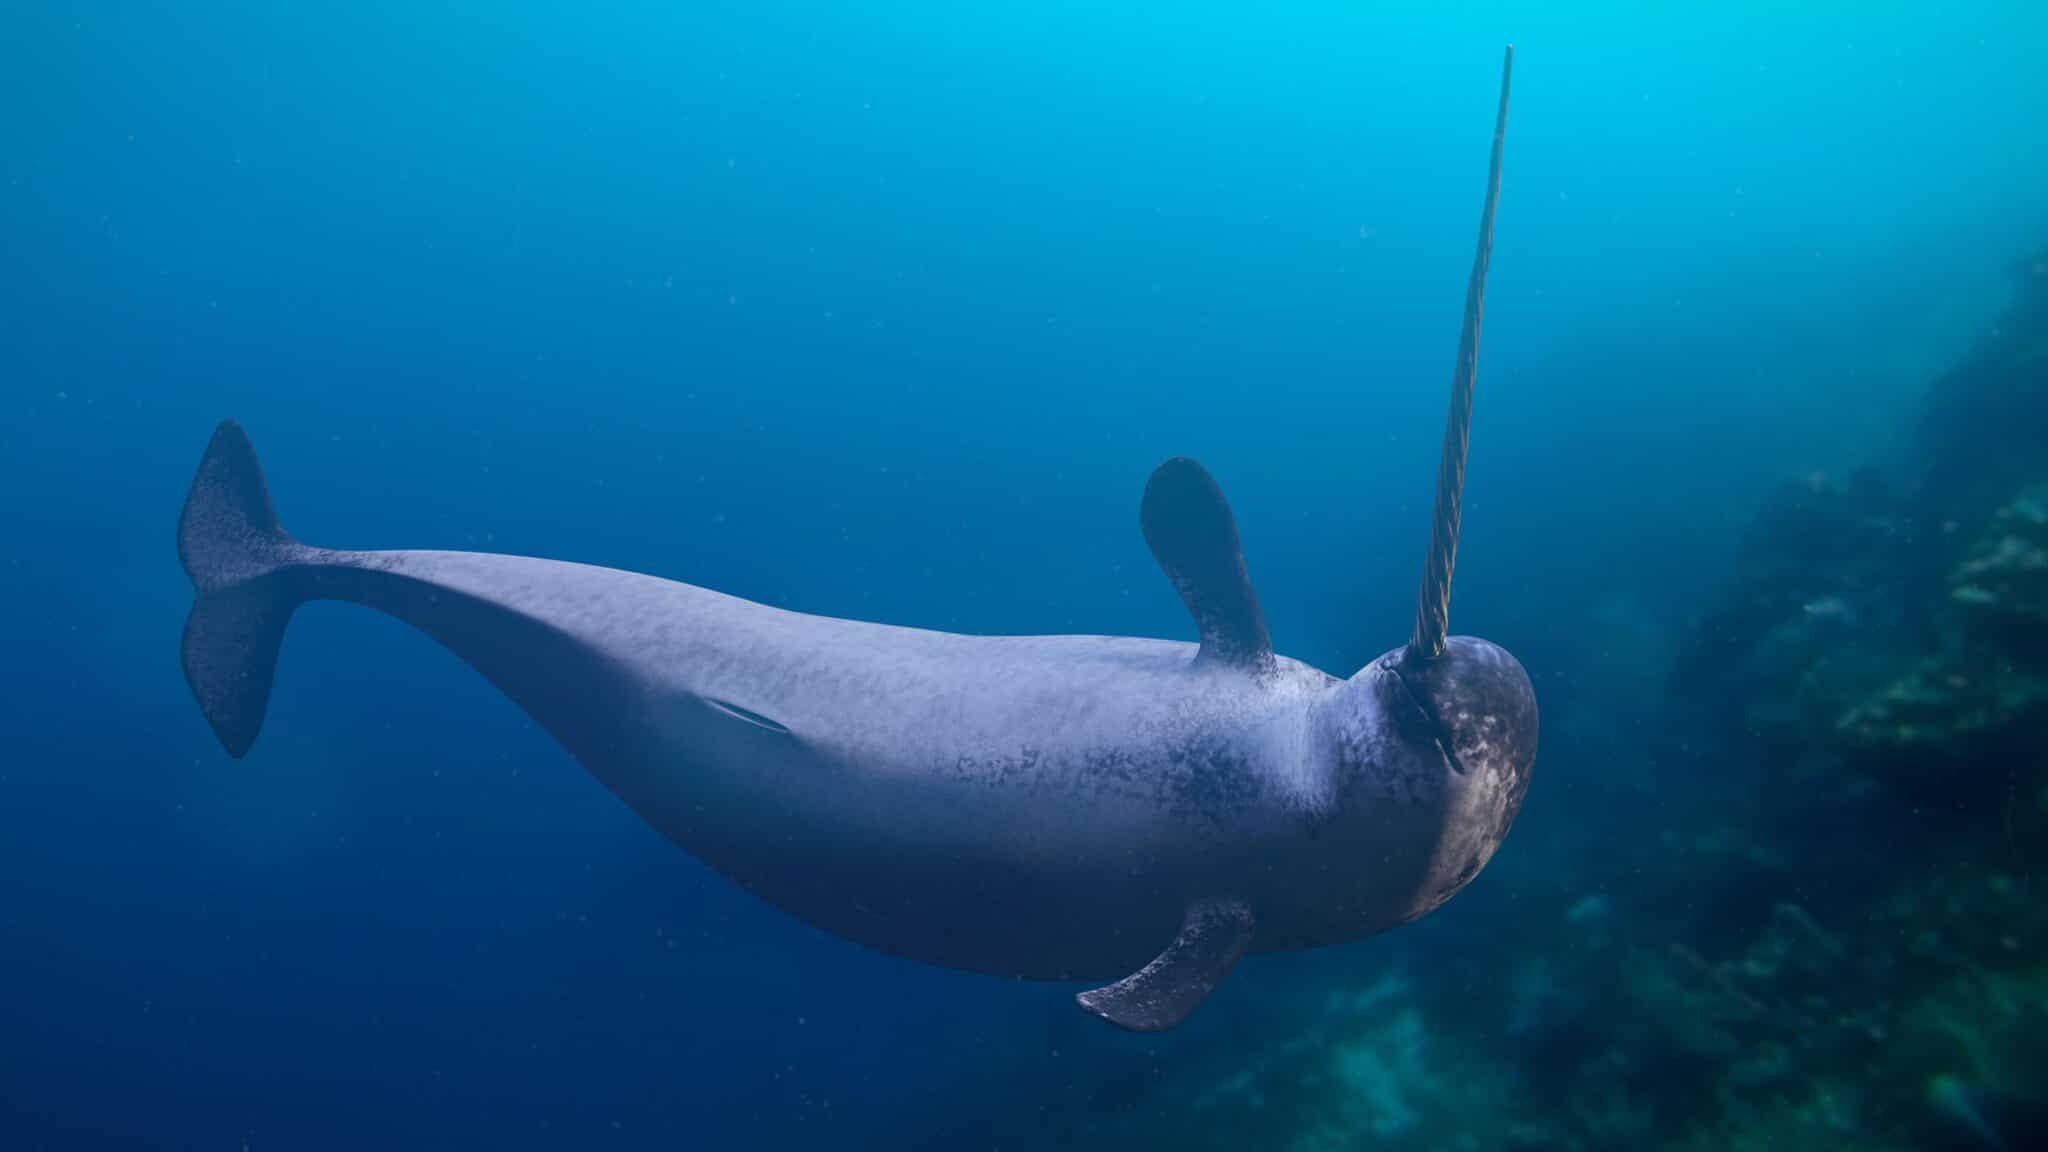 Narwhal Tusks Record Changes in the Marine Arctic - EcoWatch